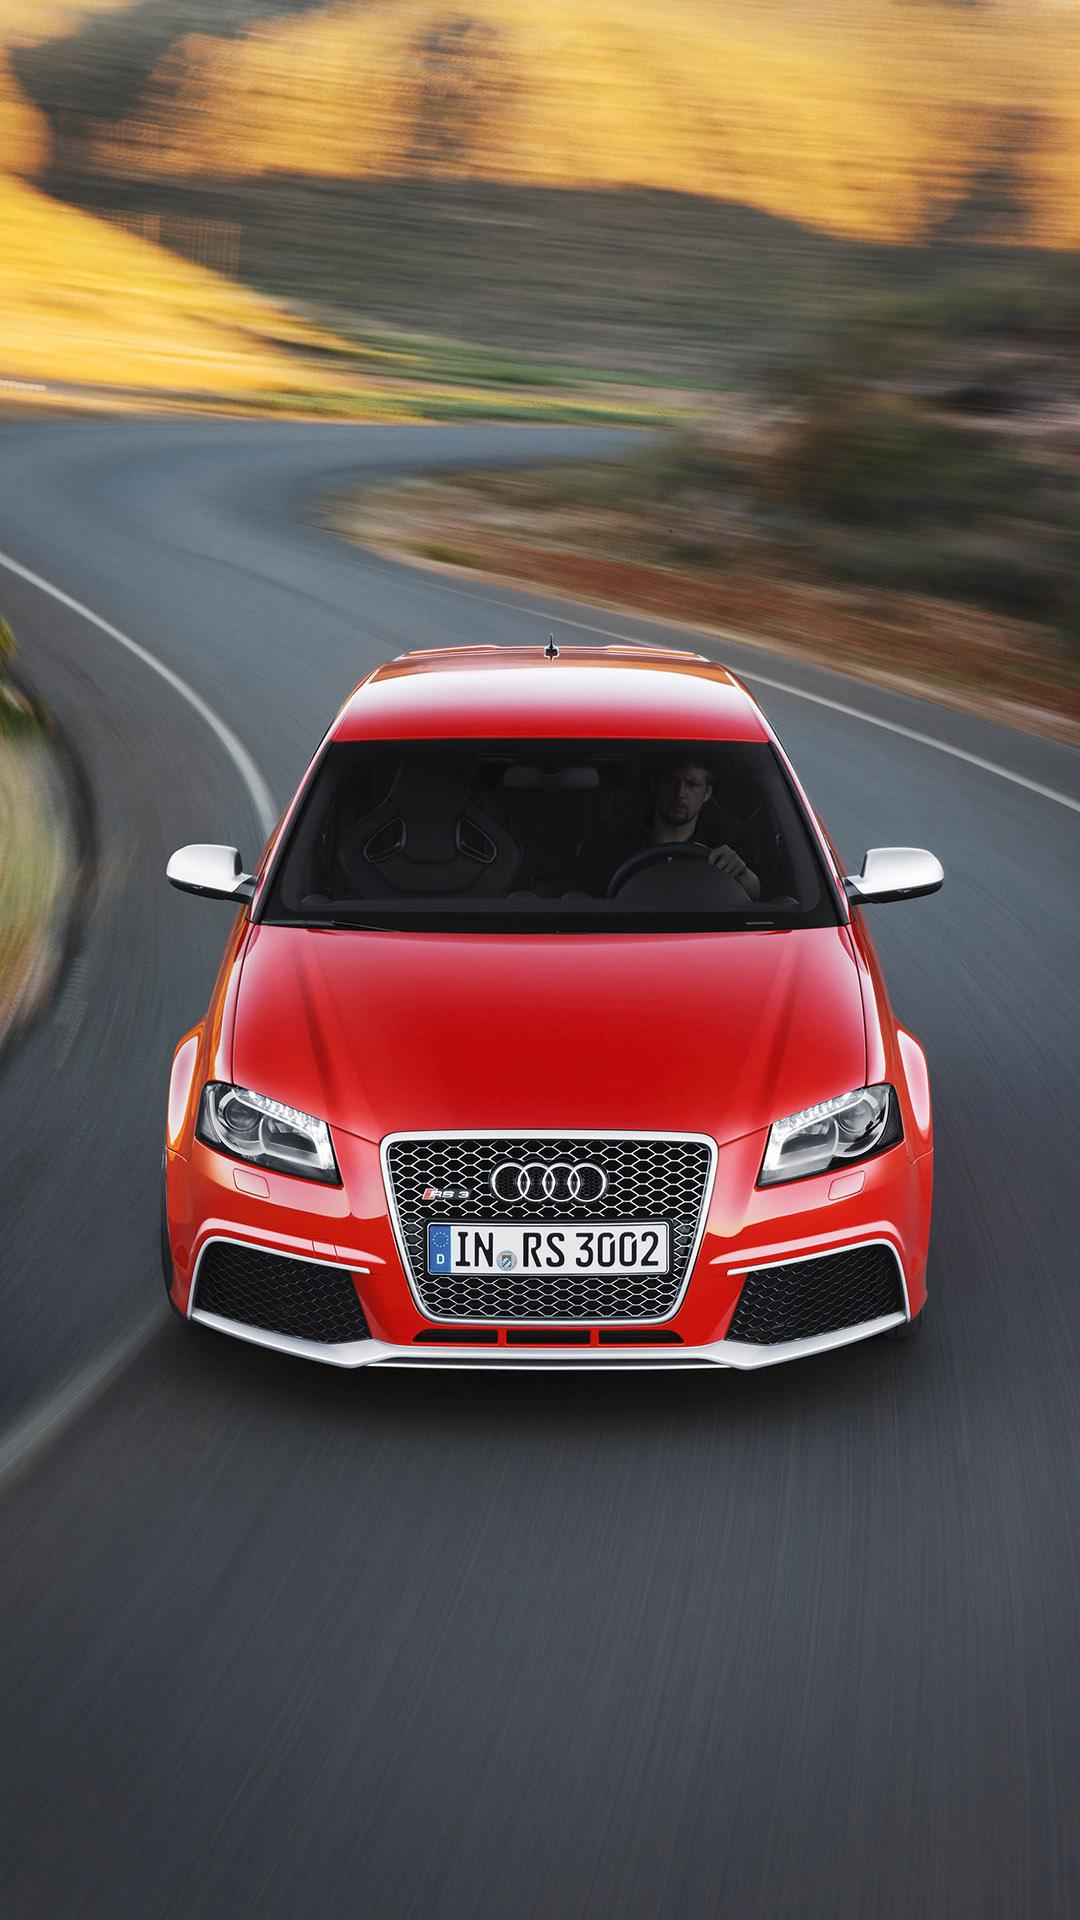 Audi RS 3 sportback htc one wallpaper, free and easy to download